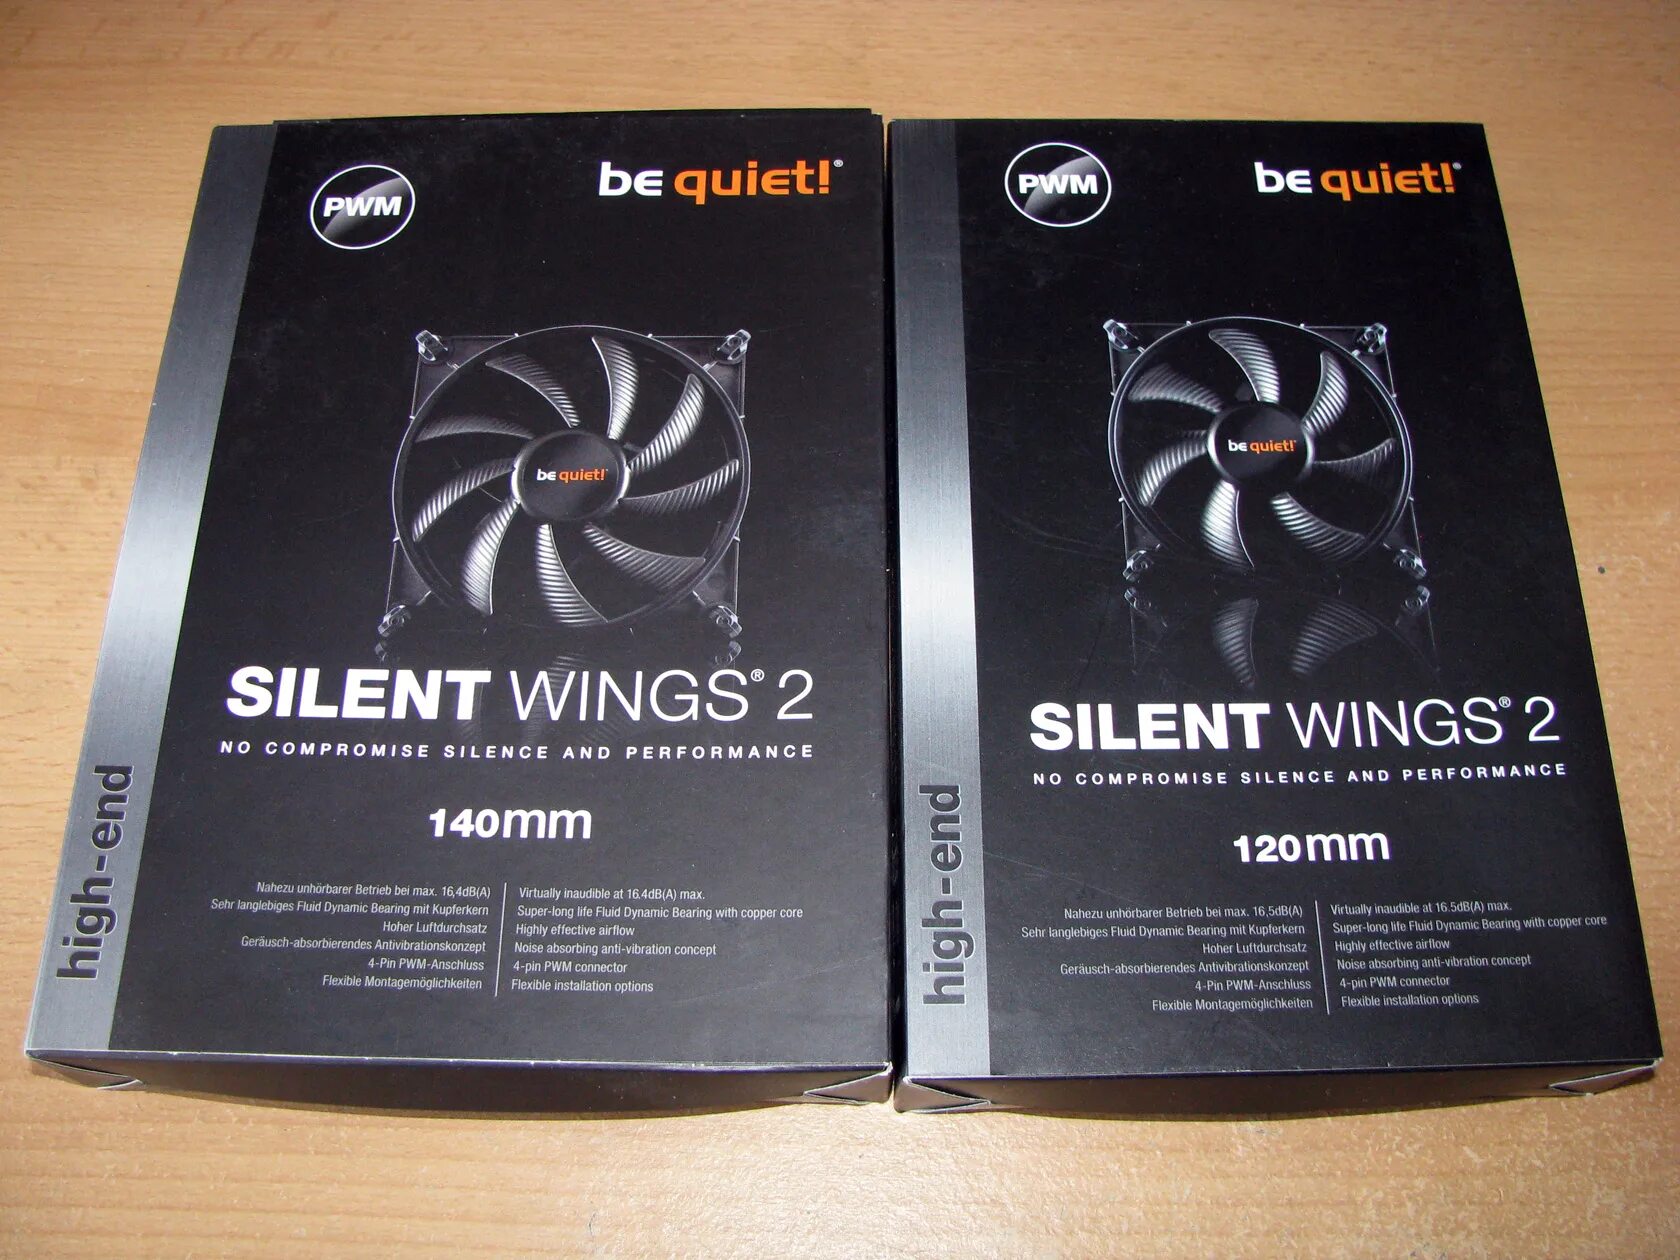 Be quiet high speed. Be quiet! Silent Wings 4 120mm PWM. Be quiet вентиляторы 120 White. Вентилятор для корпуса be quiet! Light Wings 120mm PWM High-Speed. Be quiet Silent Wings 2.